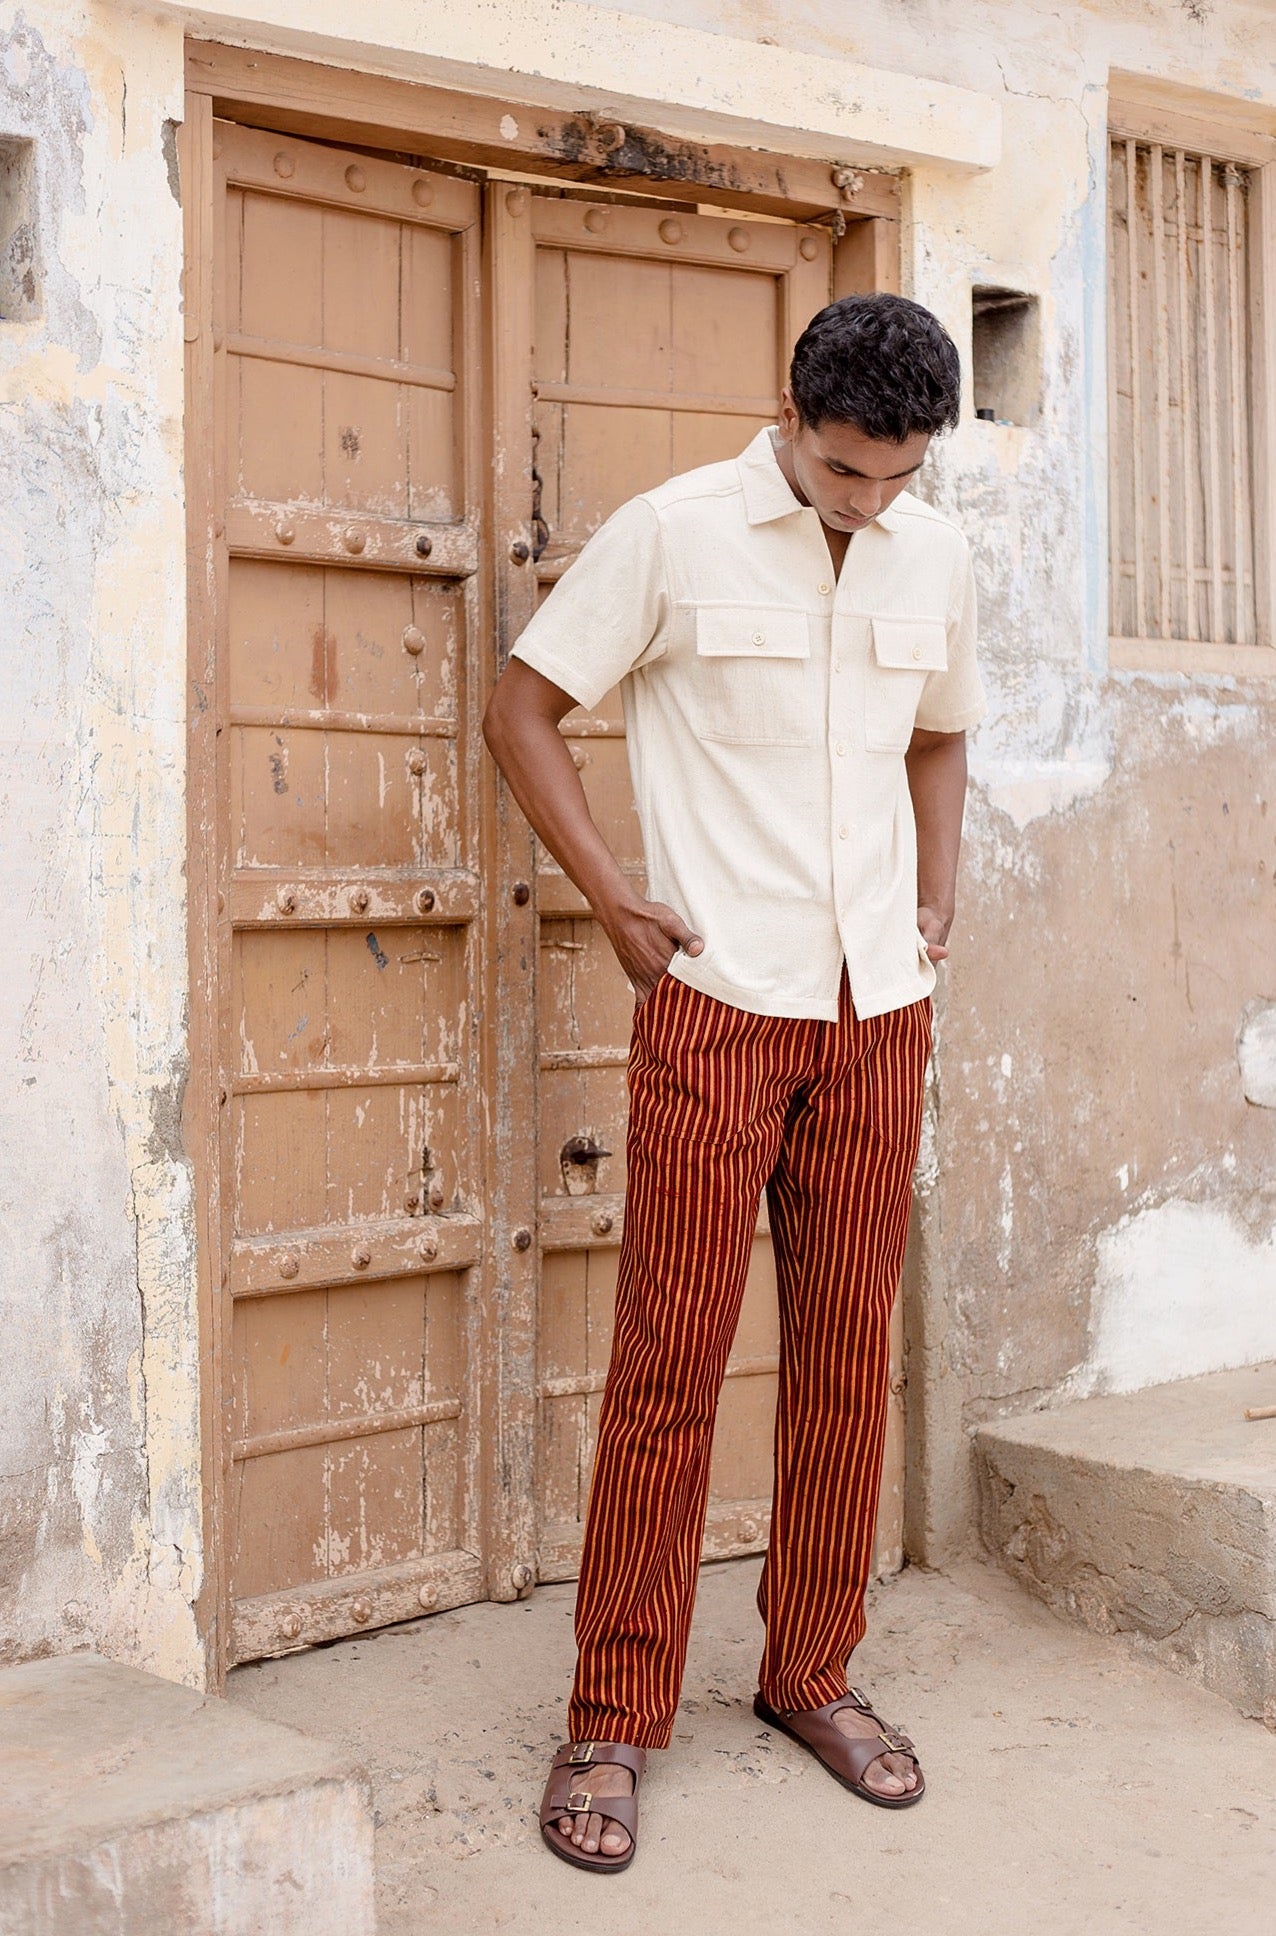 Harshad Utility Pant in Pomegranate Stripe Block